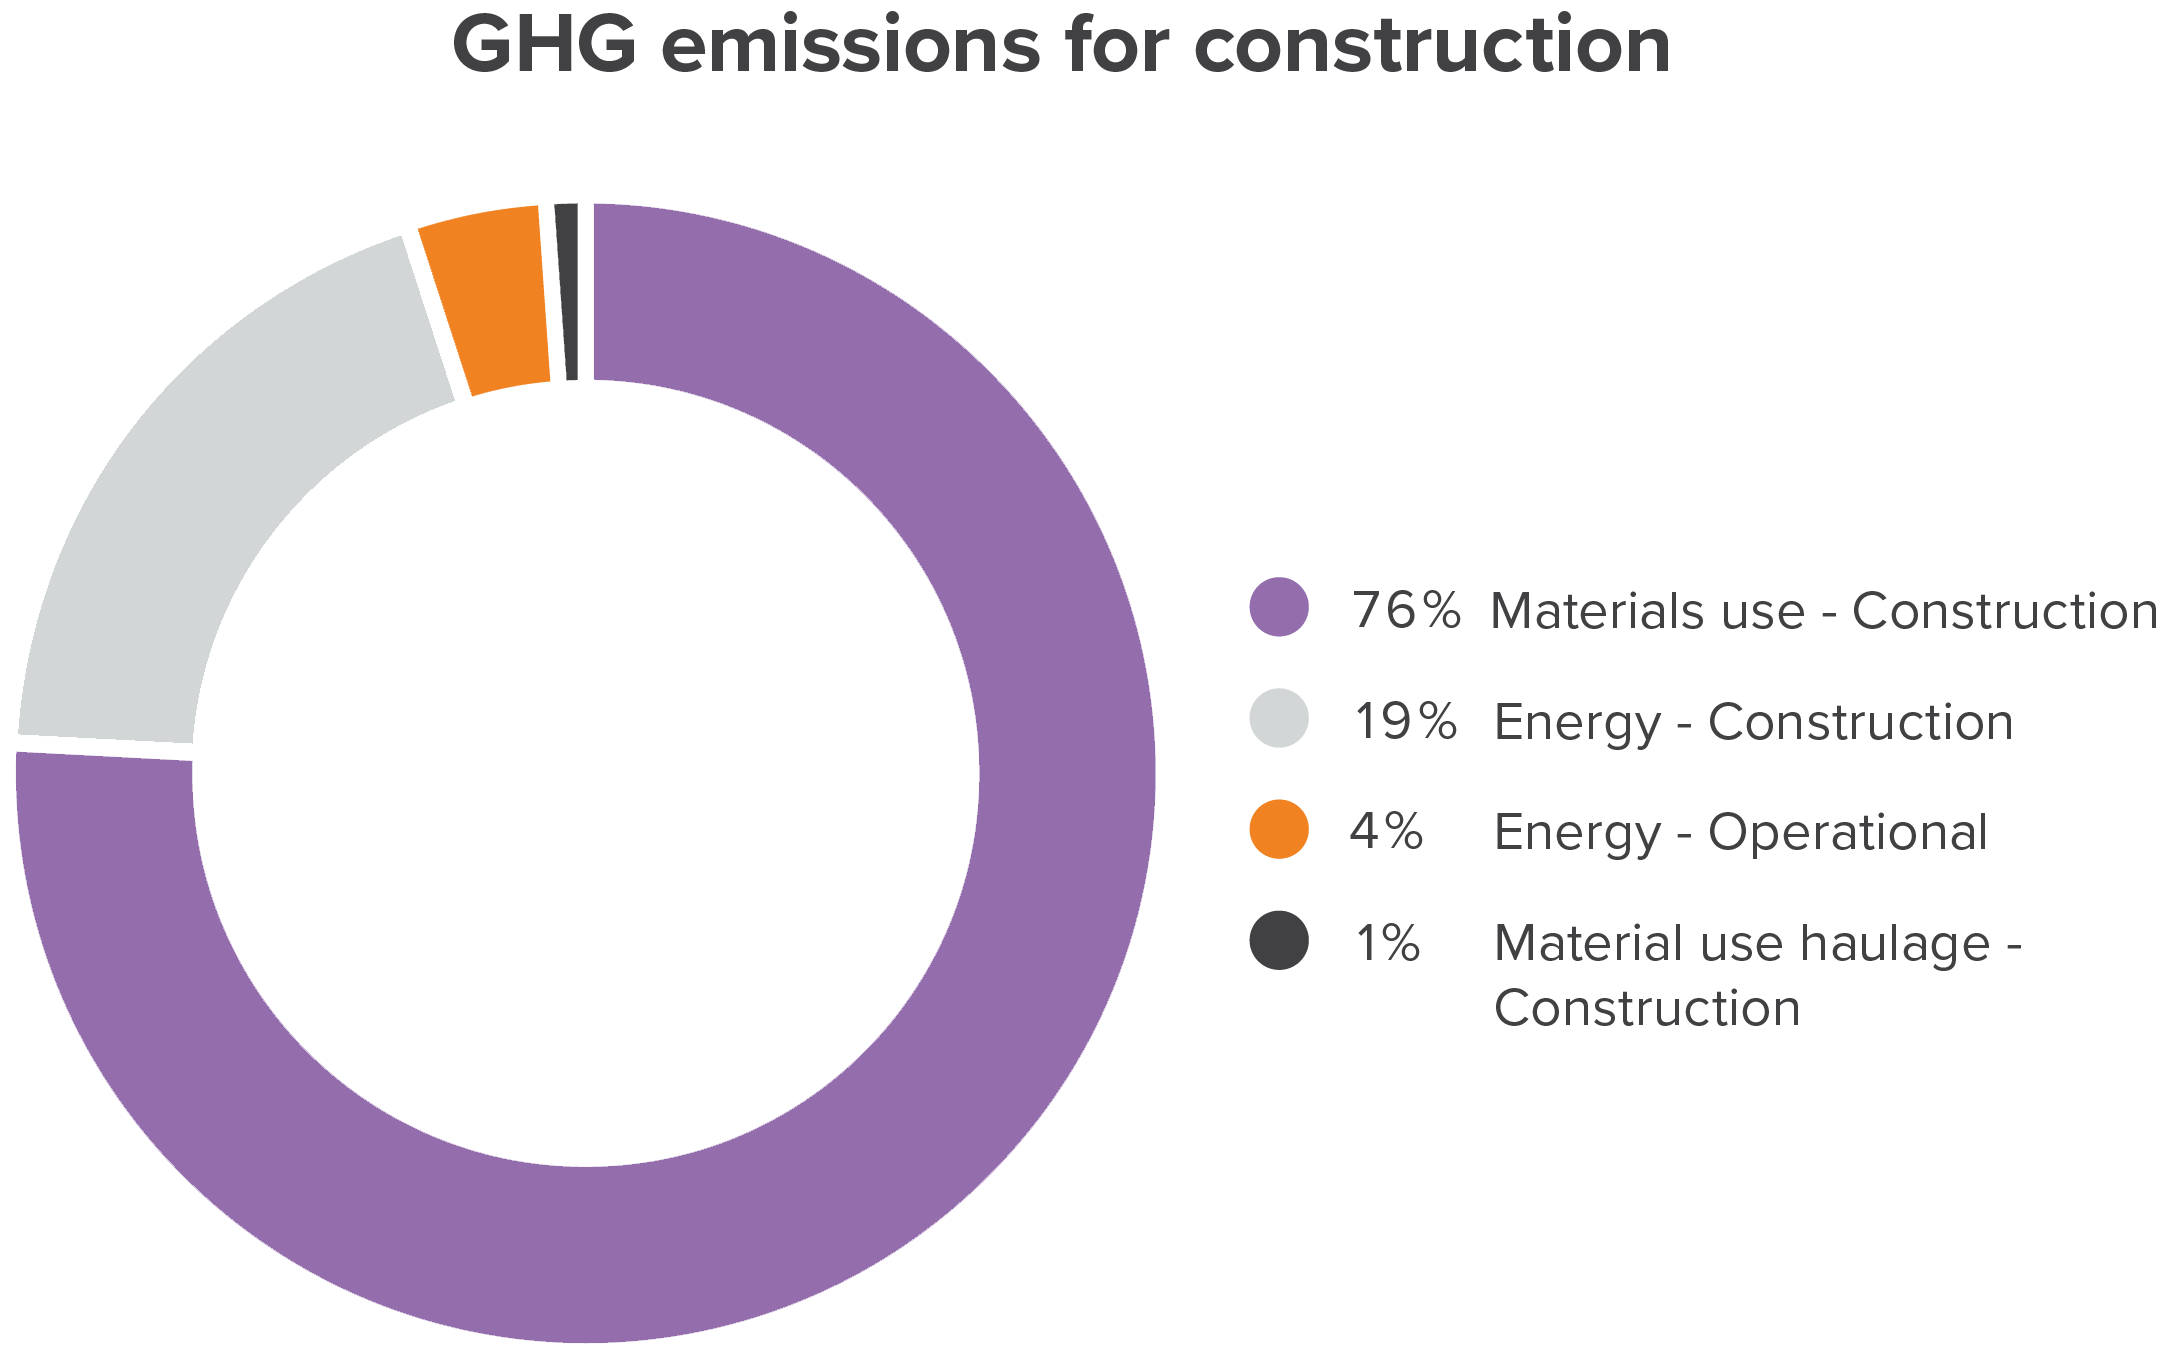 GHG emissions for construction;  76% Materials use - Construction, 19% Energy - Construction, 4% Energy -Operation, 1% Material use haulage - Construction